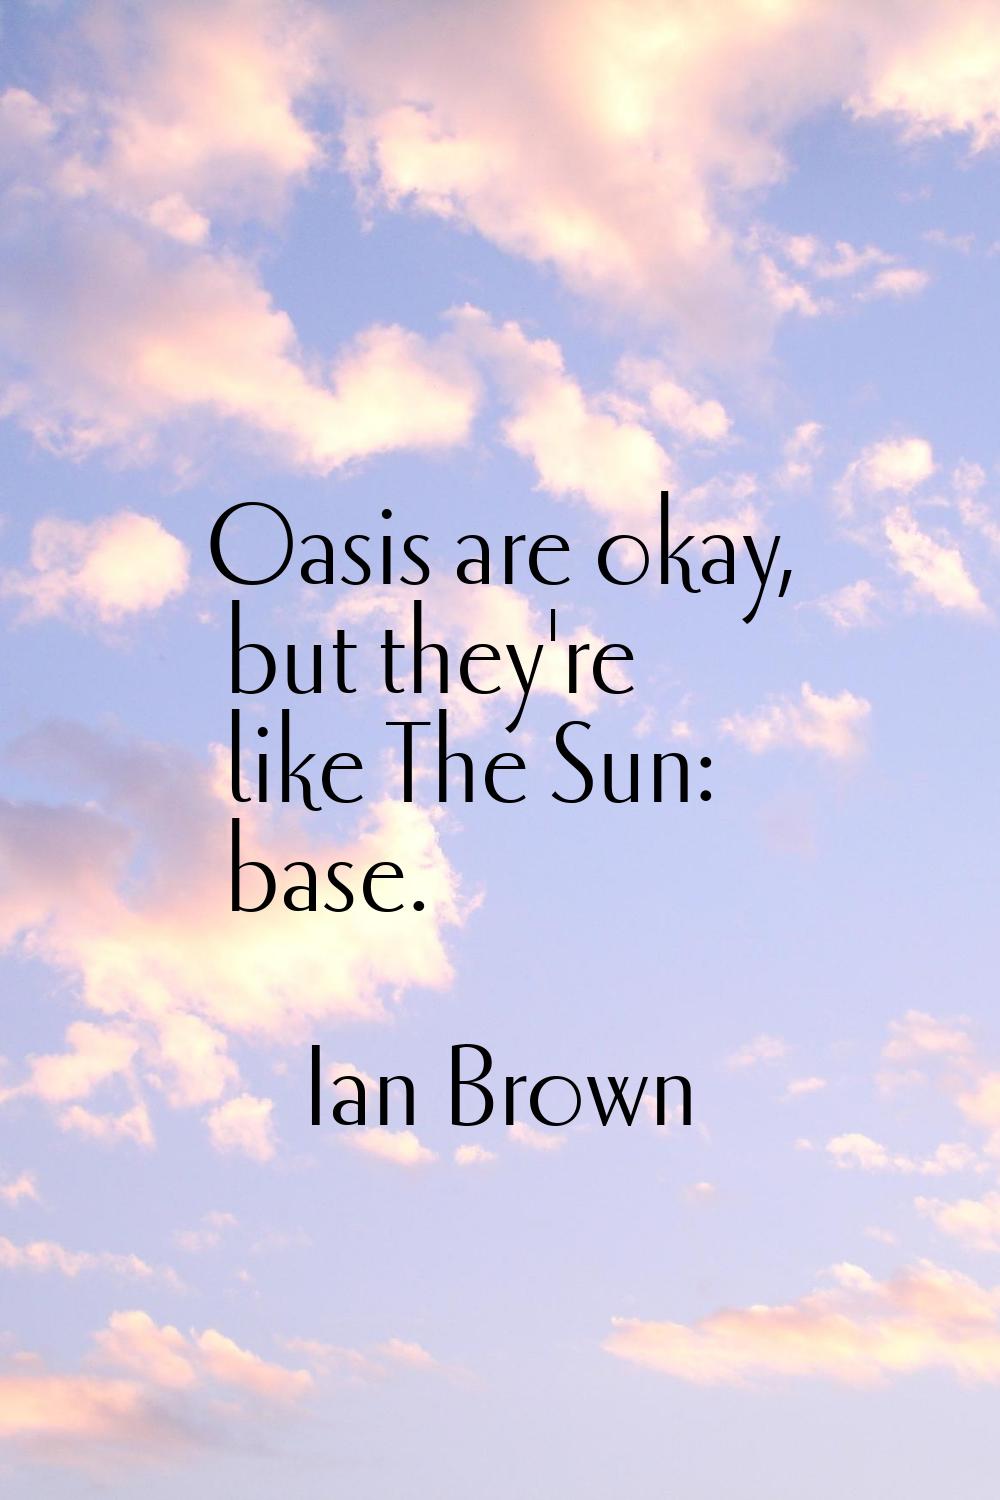 Oasis are okay, but they're like The Sun: base.